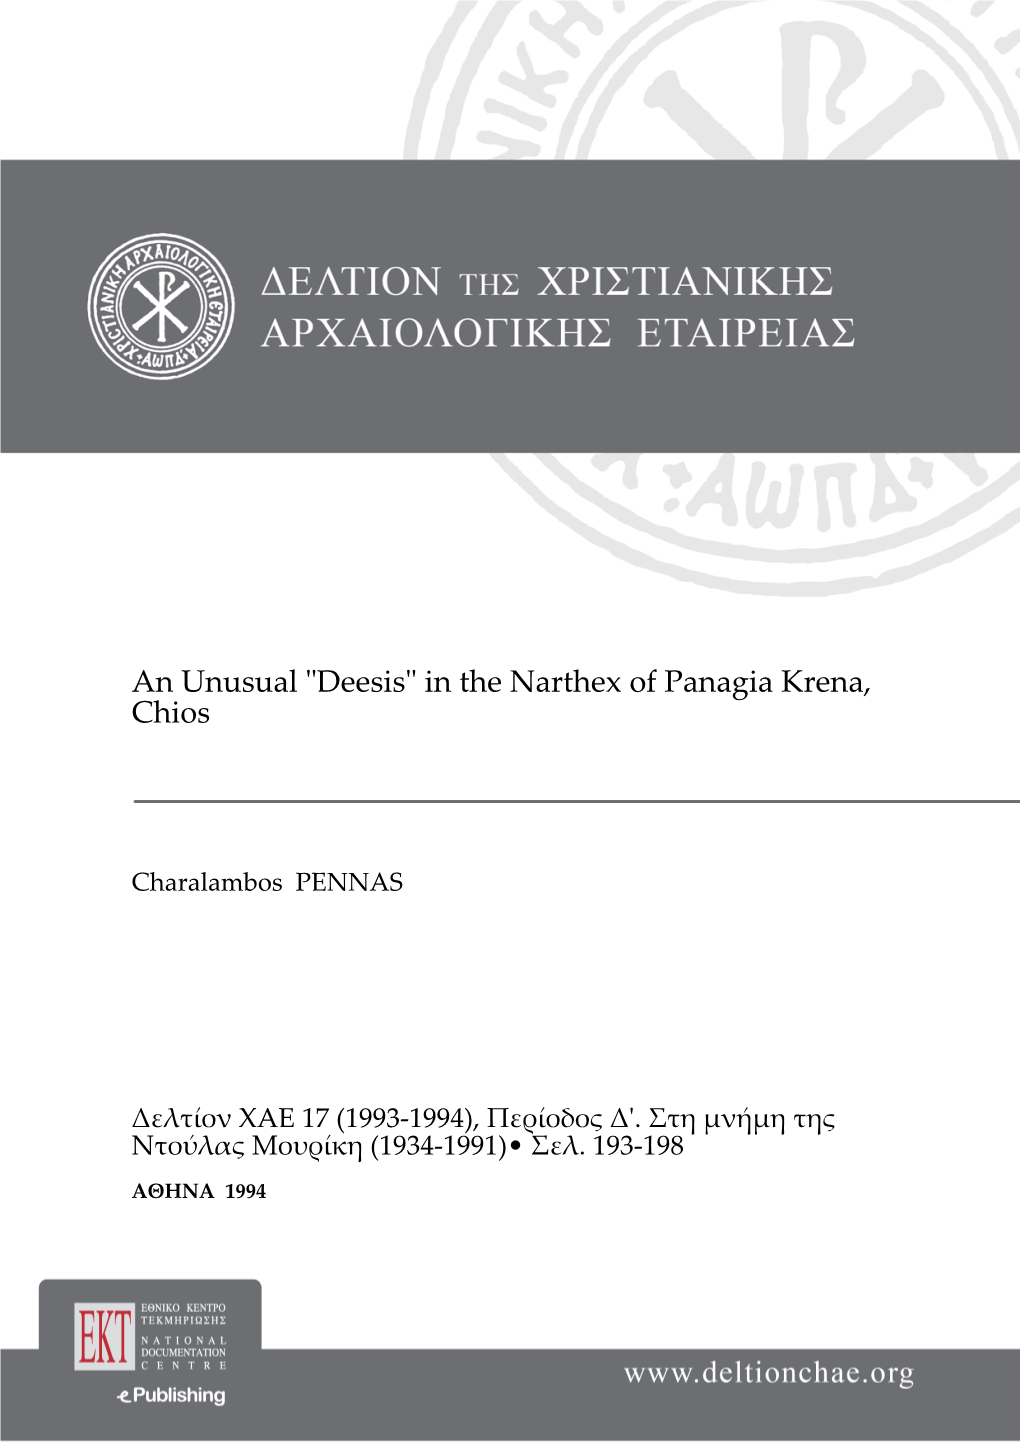 An Unusual "Deesis" in the Narthex of Panagia Krena, Chios